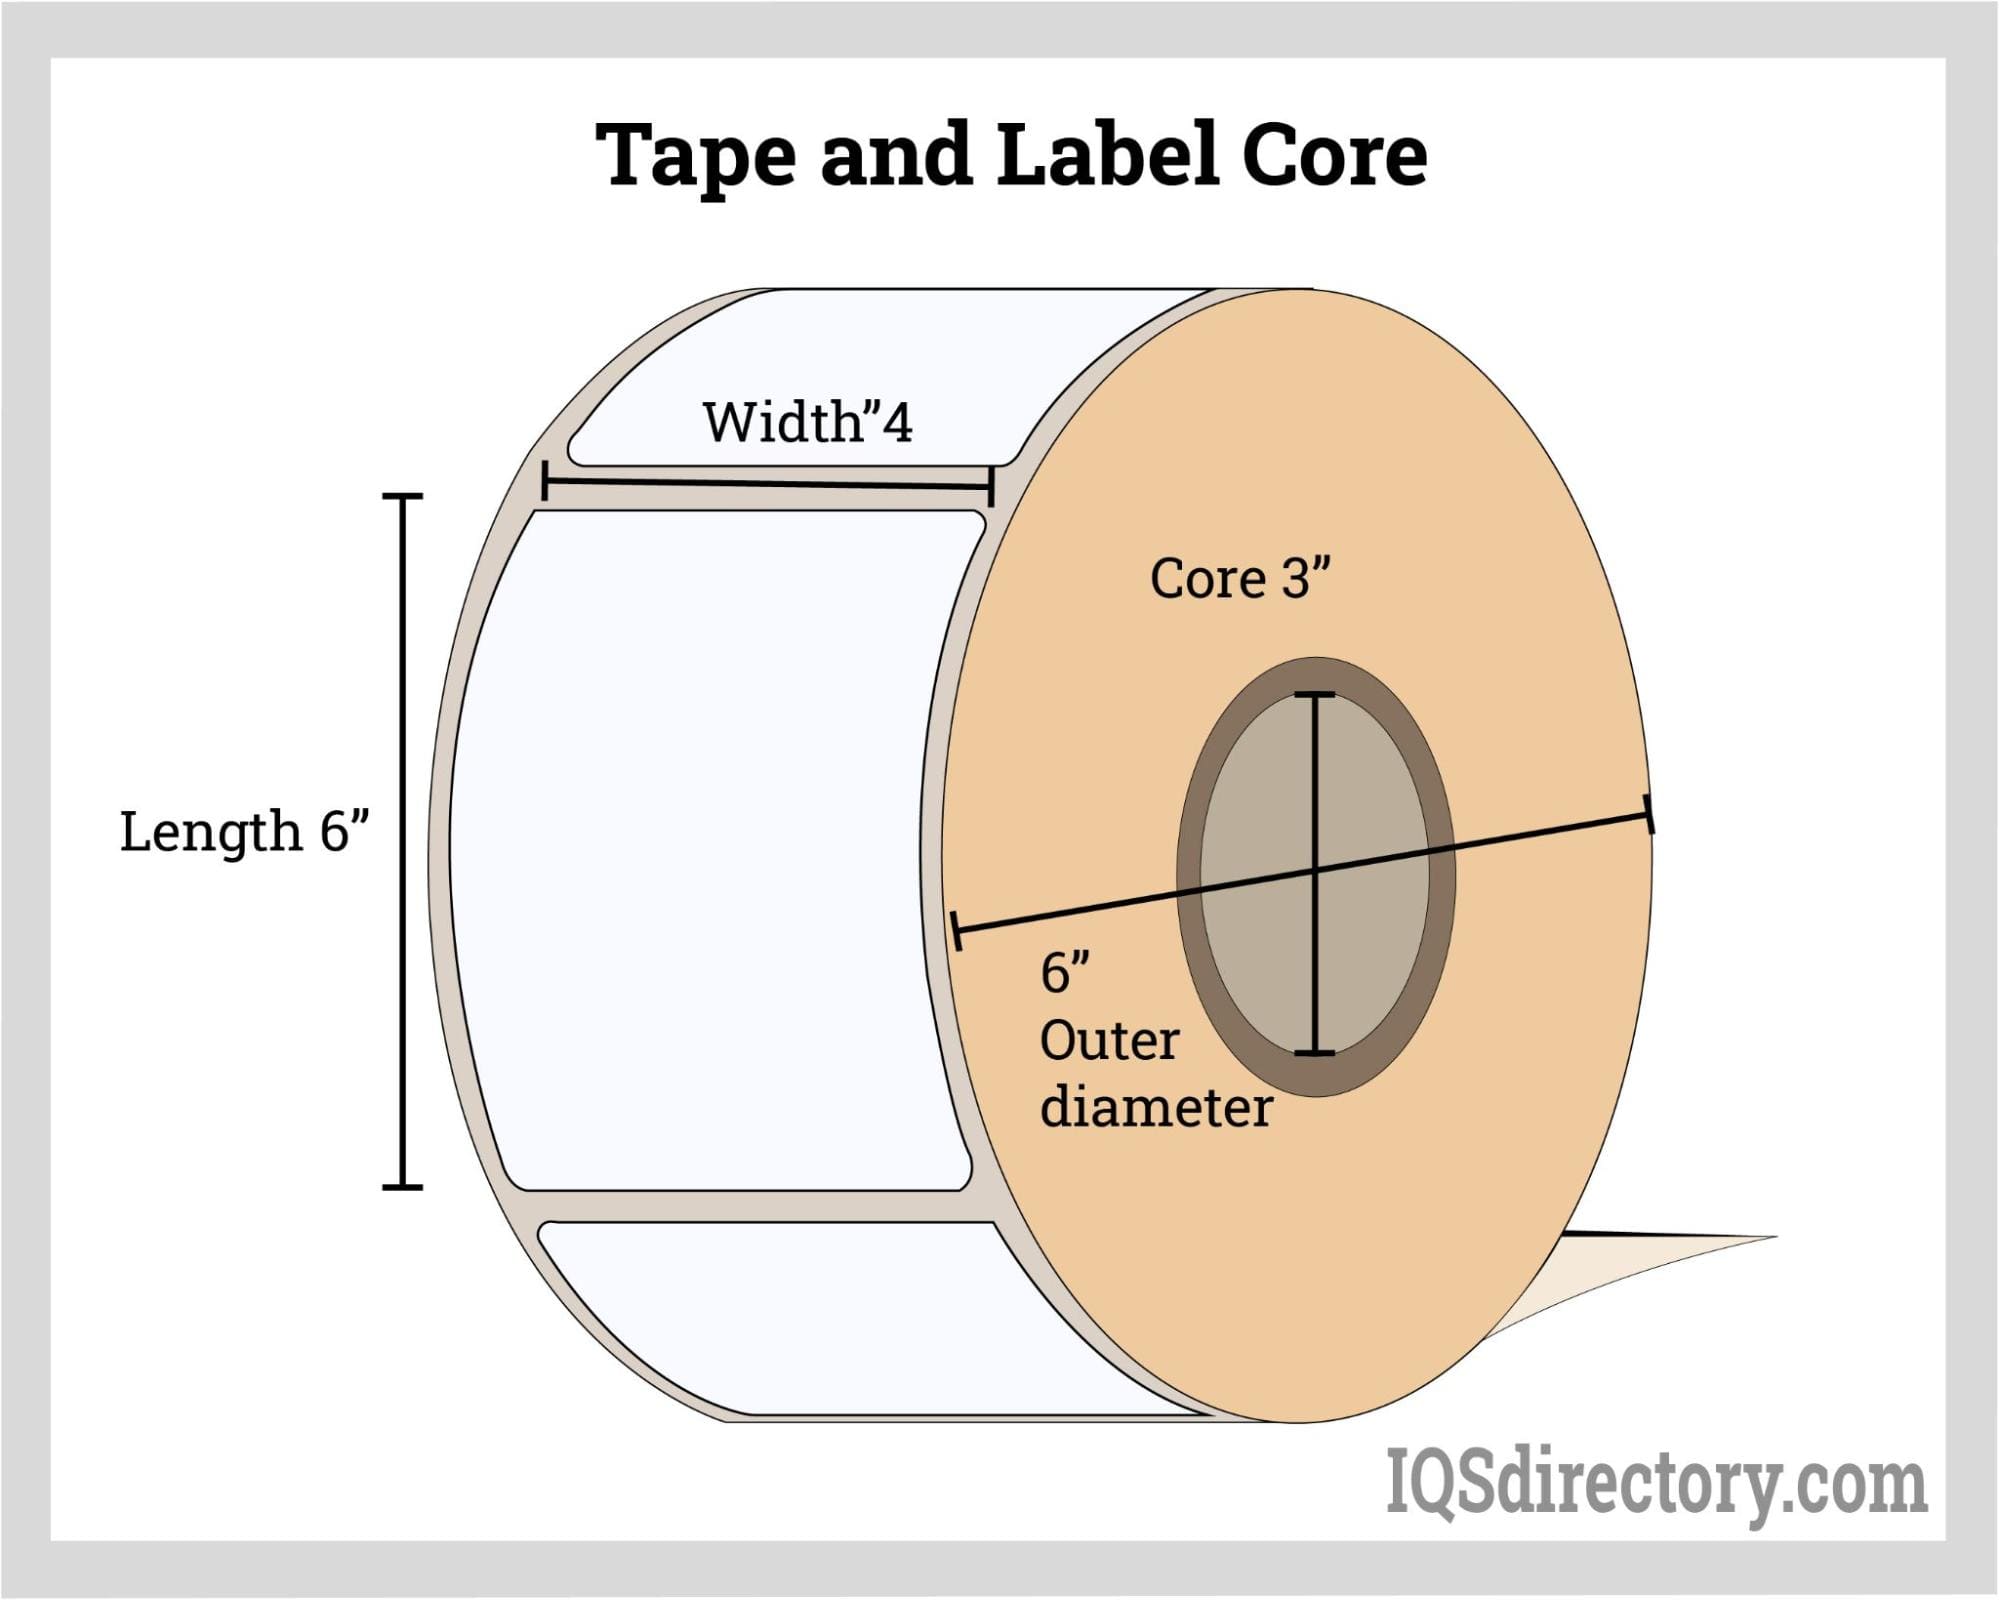 Tape and Label Core